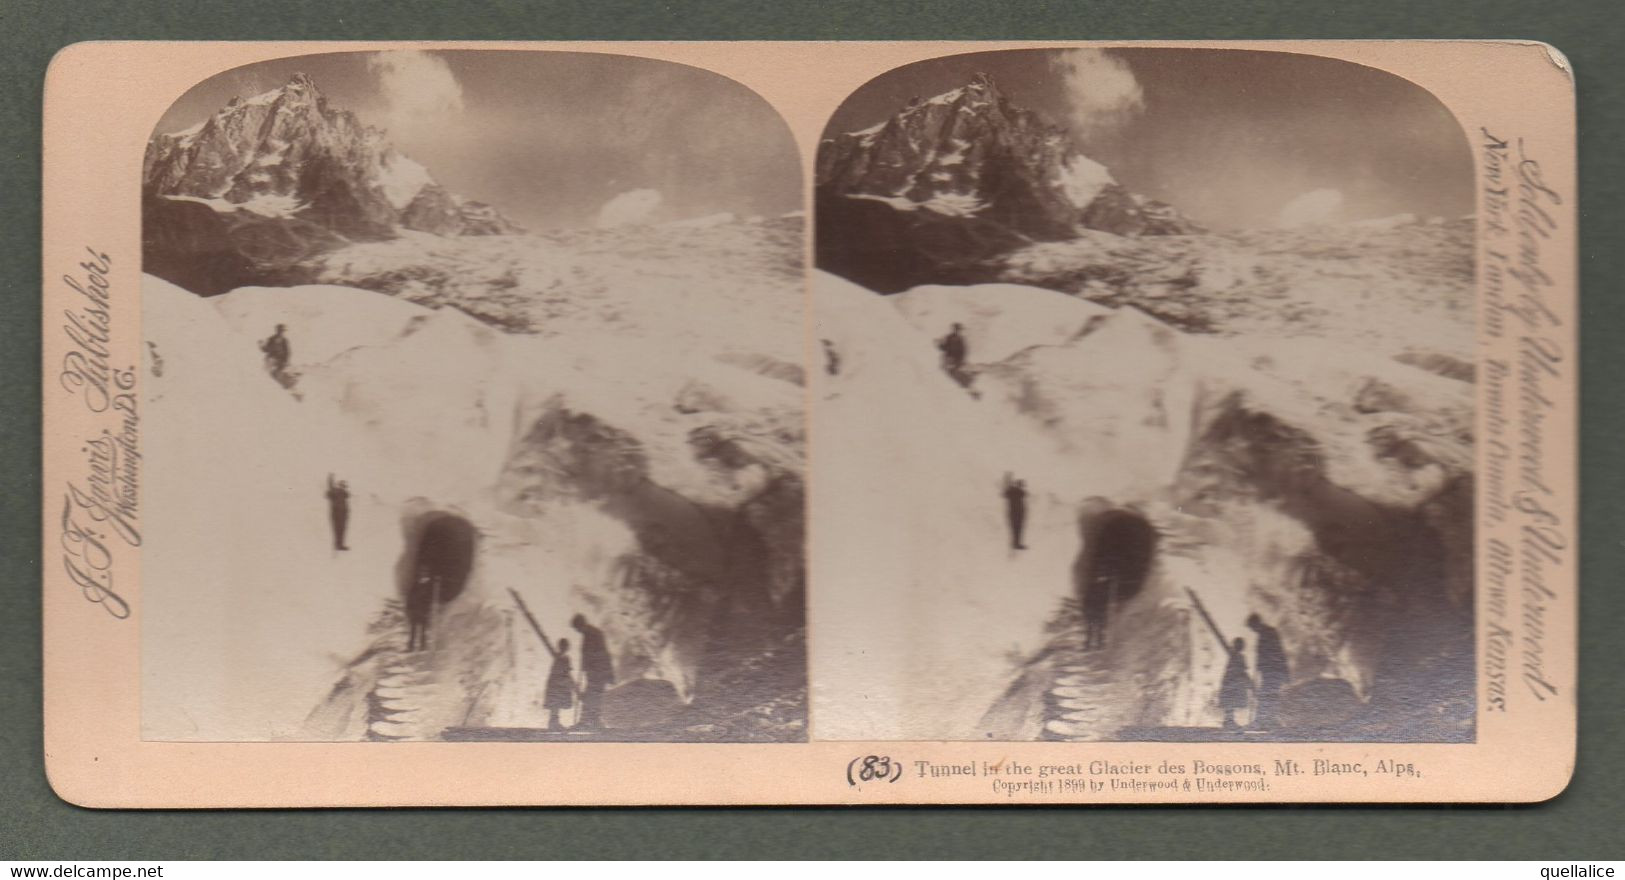 02157 "83-TUNNEL IN THE GREAT GLACER DES BOSSONS-MT. BLANC-ALPE-1899" STEREOSCOPICA ORIG. - Cartes Stéréoscopiques